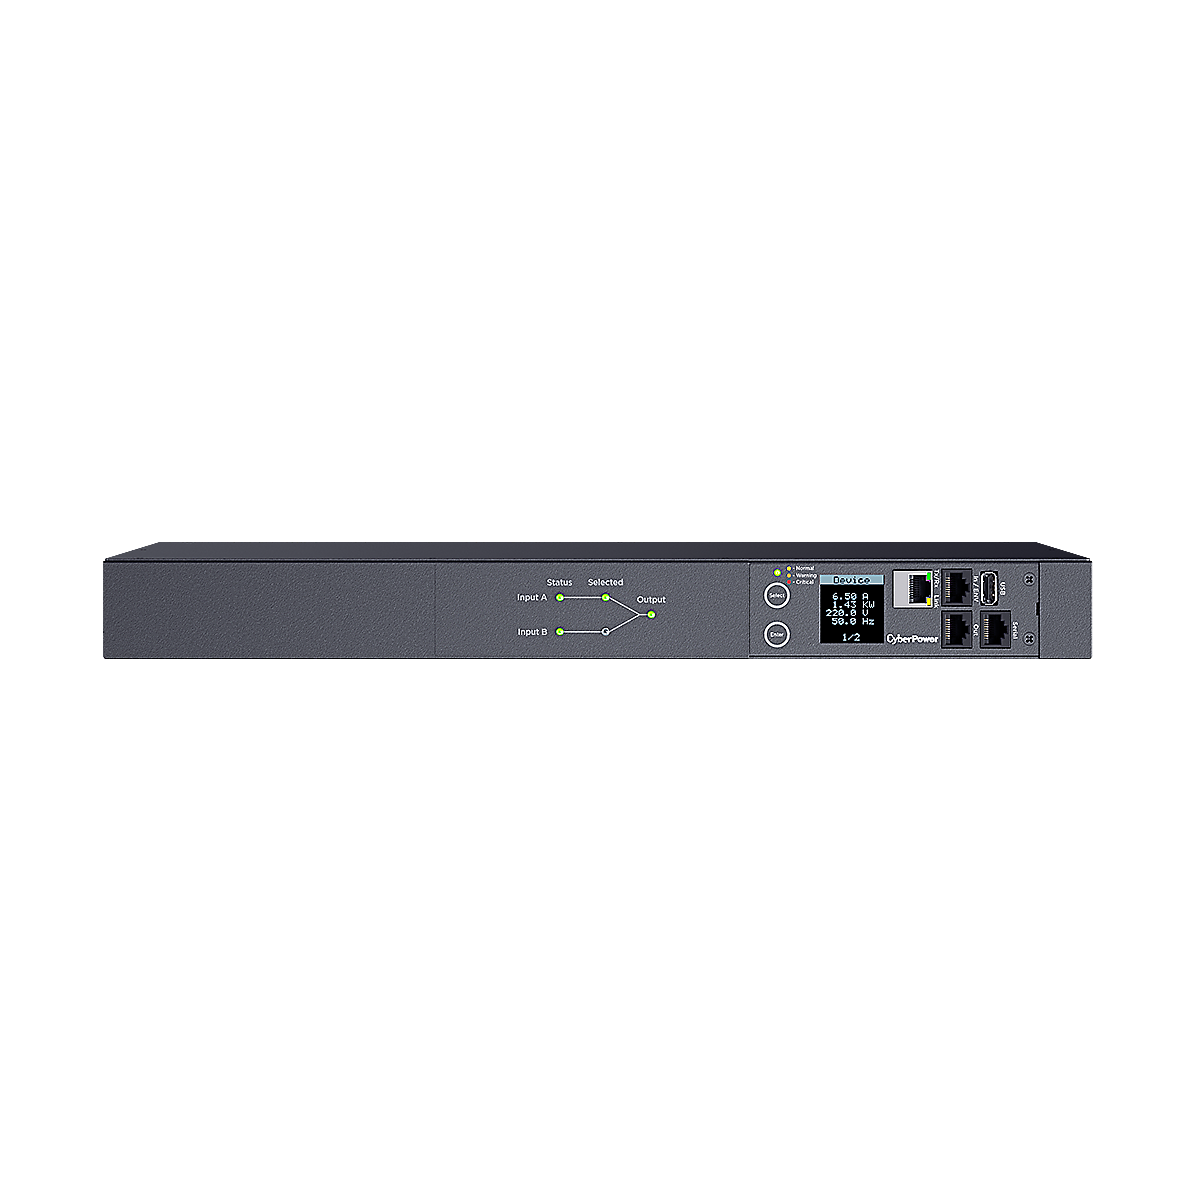 CyberPower Systems Power Distribution Unit - PDU44005